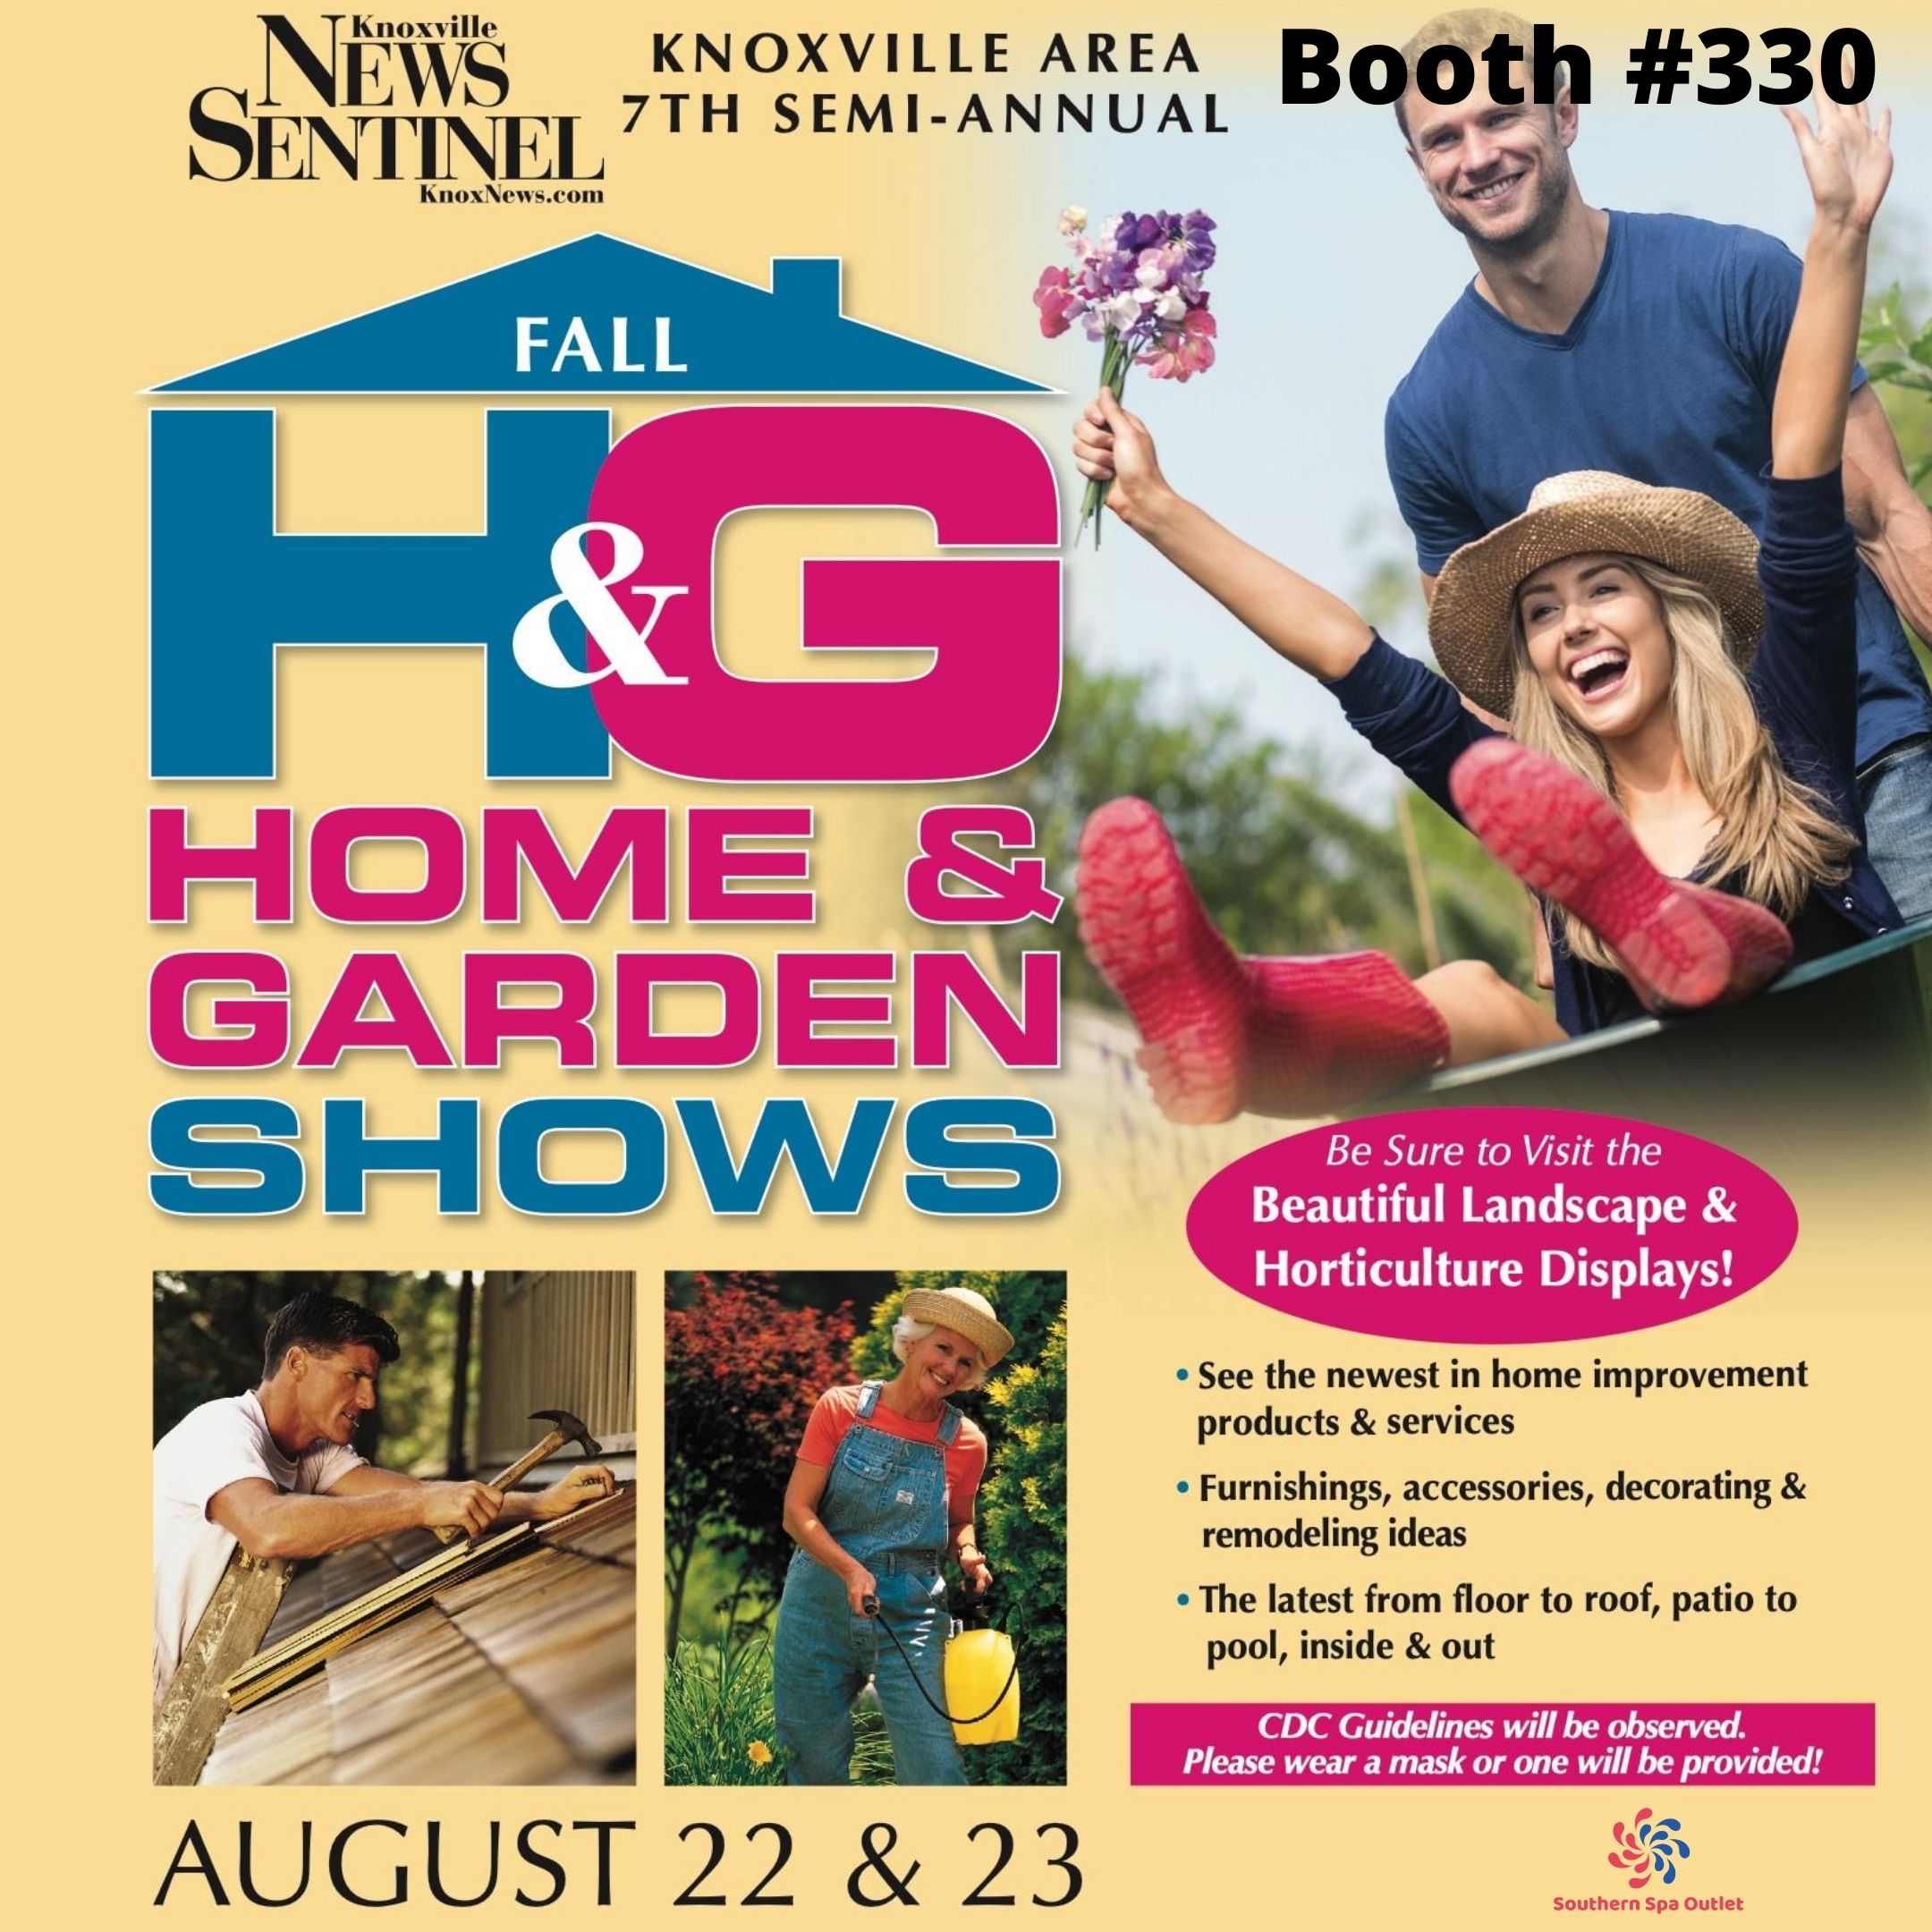 Home & Garden show in Knoxville 2020